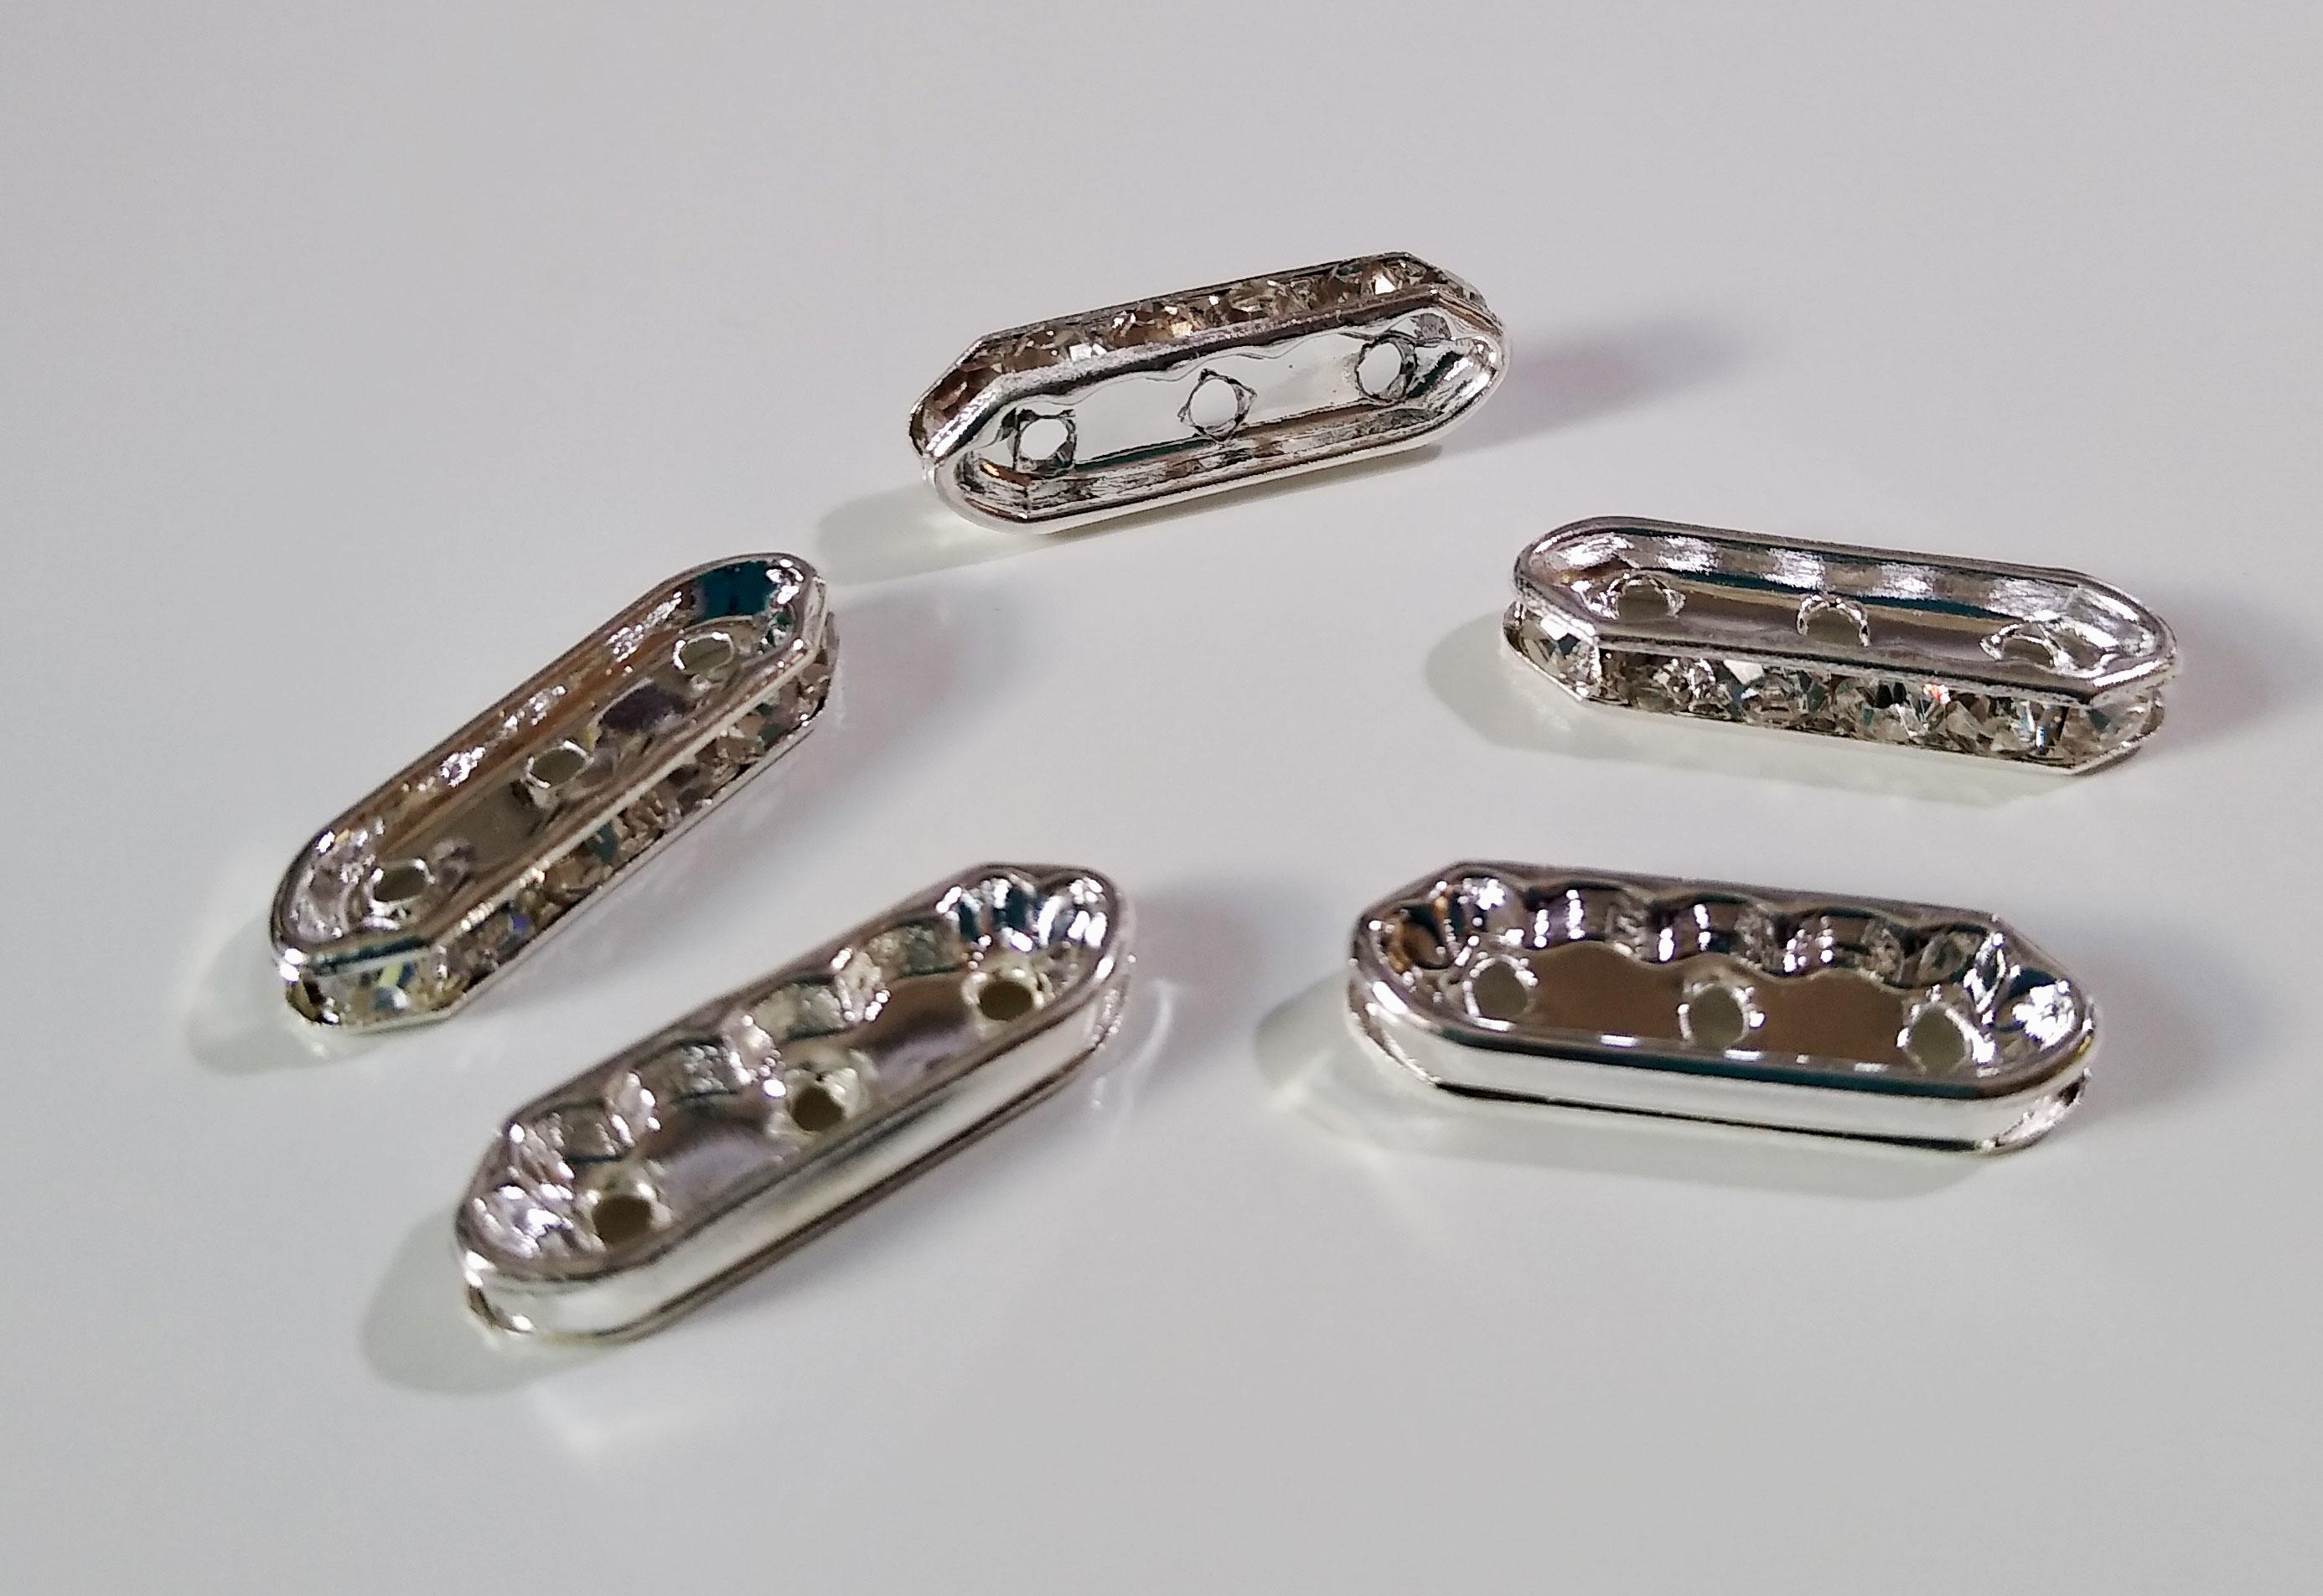 22mm 3 hole Spacer Bar - Silver Plated with Rhinestones